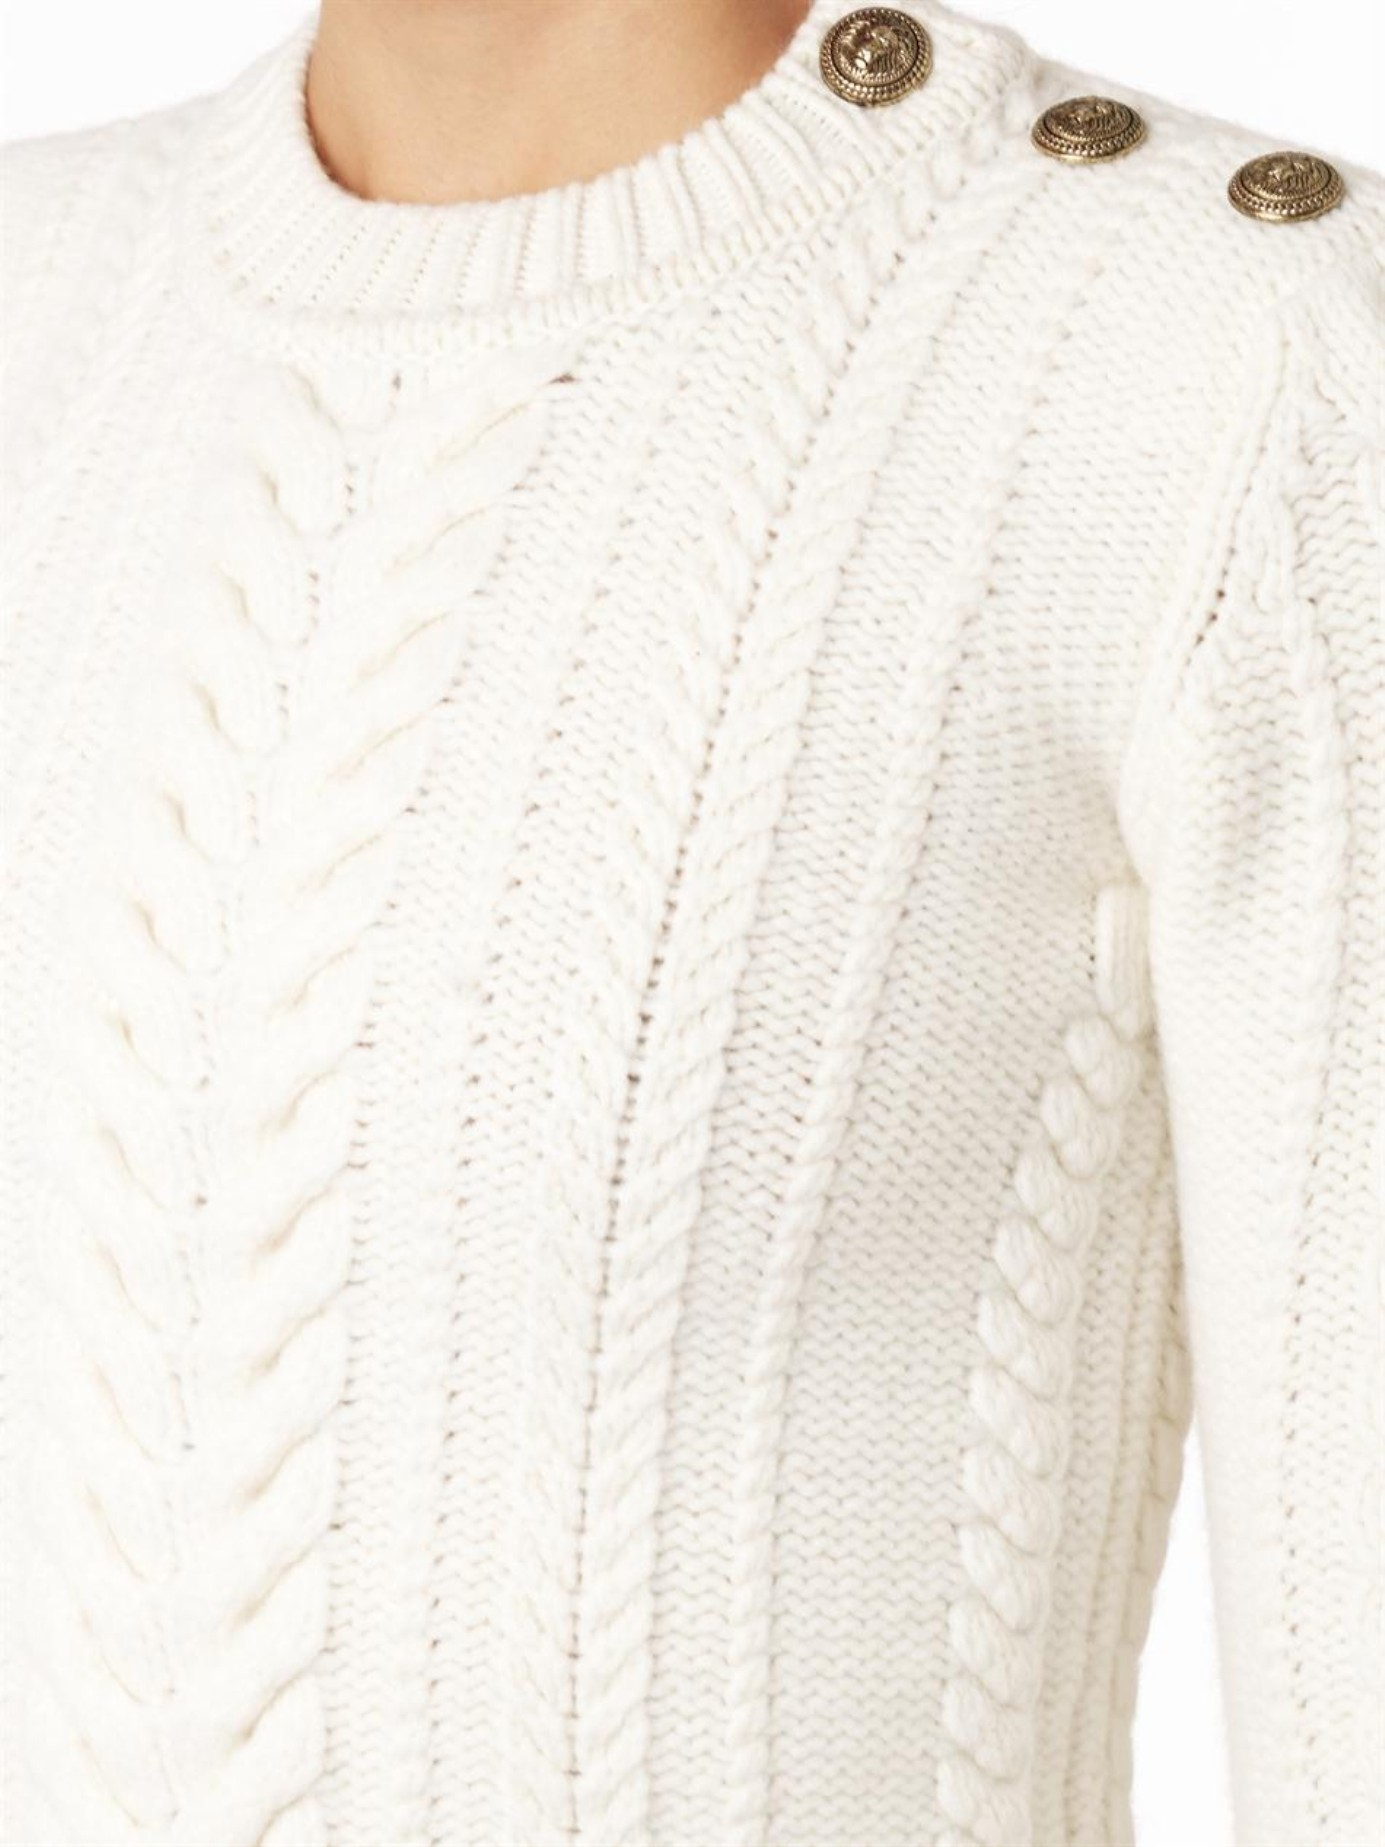 hul liberal Gangster Balmain Cable-Knit Wool Sweater in Cream (Natural) - Lyst